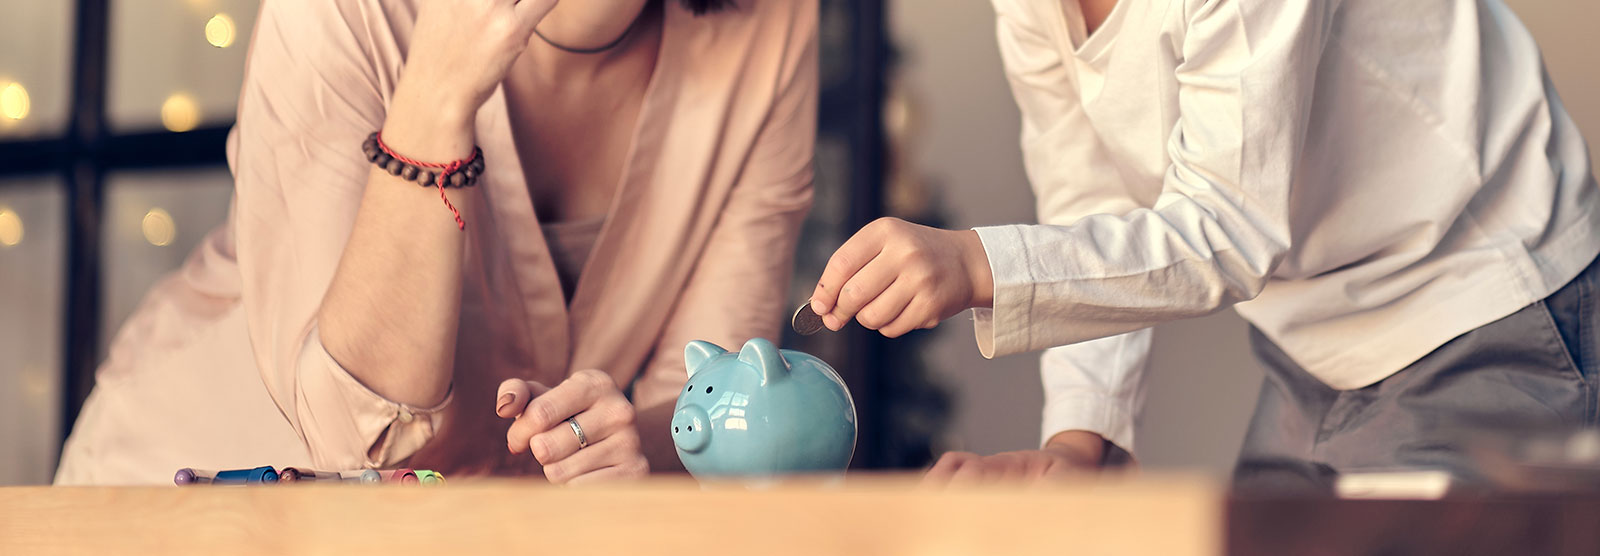 Man and woman standing over piggy bank, putting a quarter in.